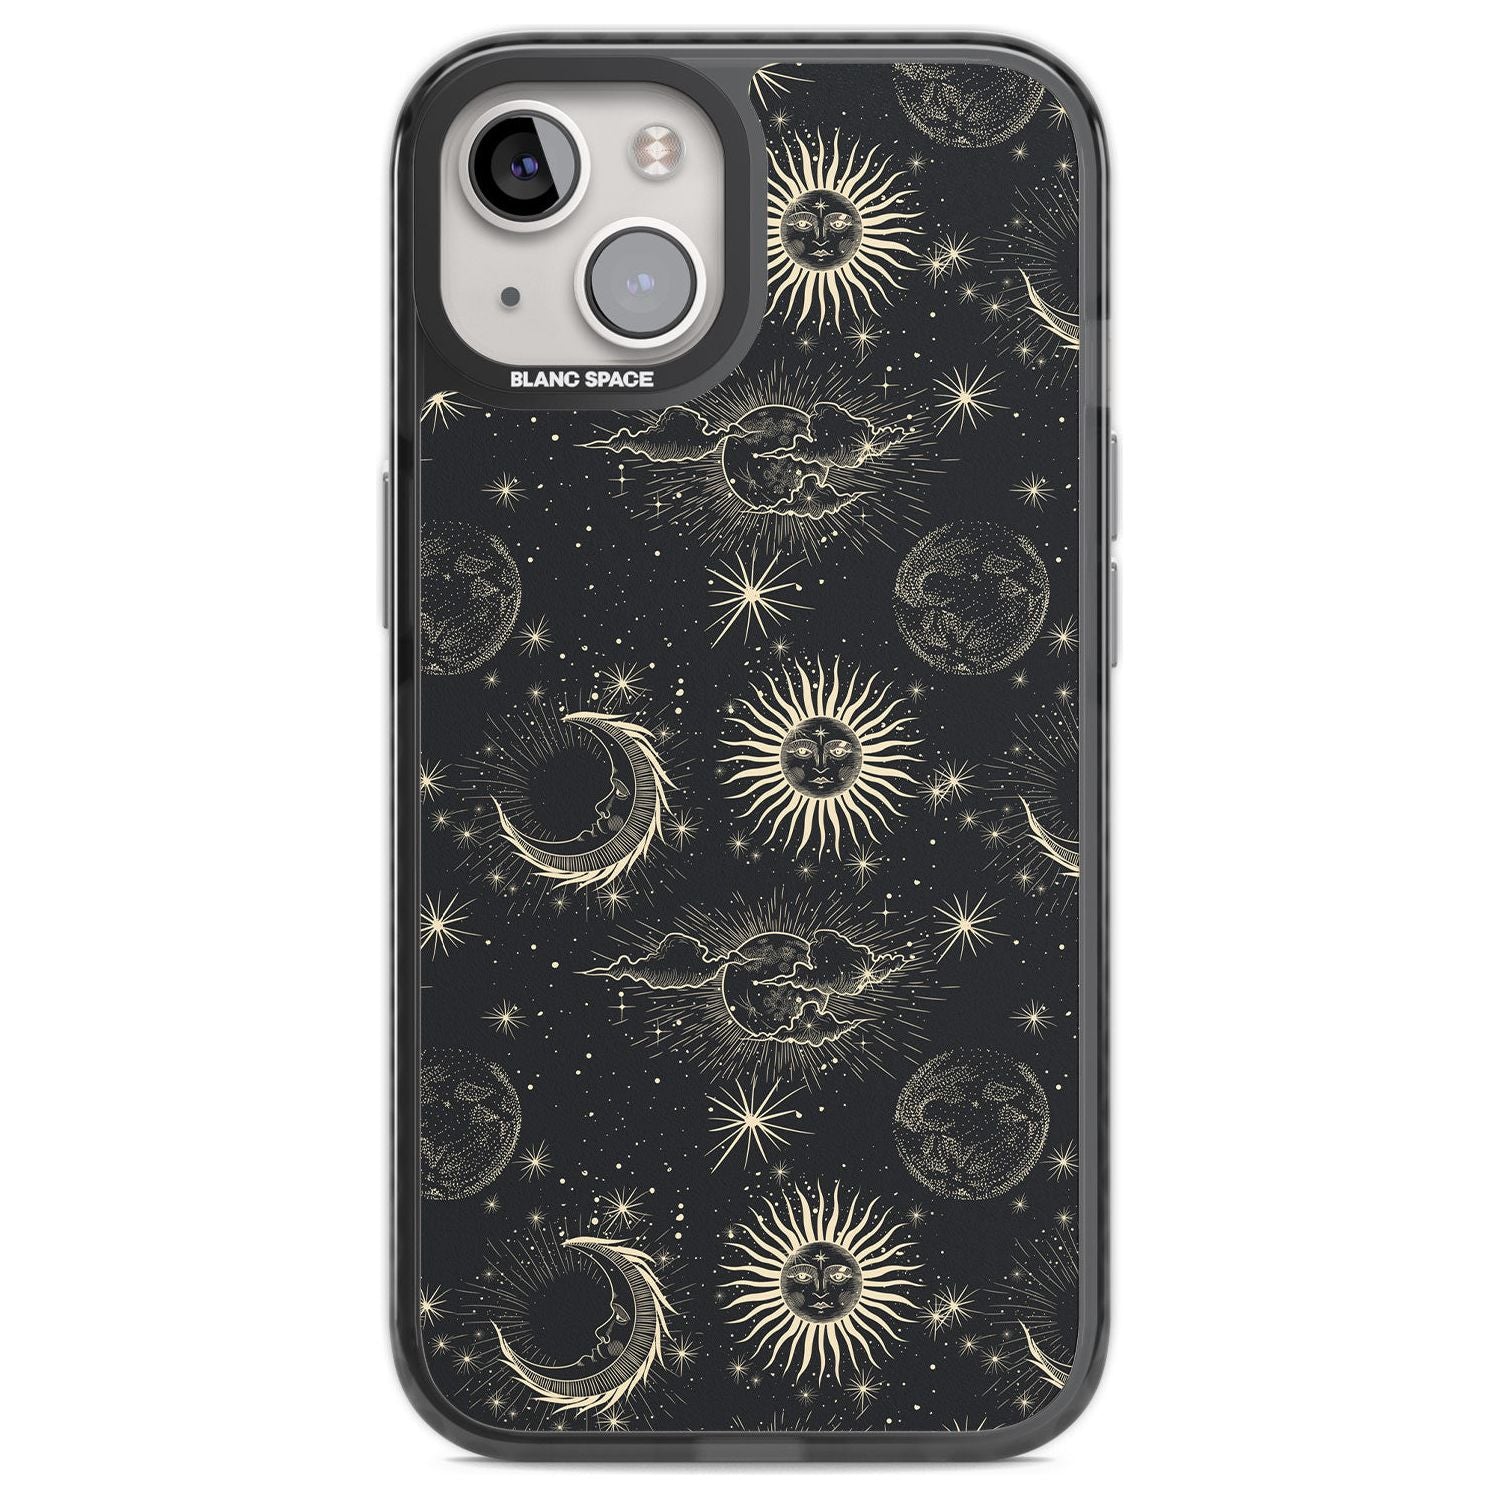 Large Suns, Moons & Clouds Astrological Phone Case iPhone 12 / Black Impact Case,iPhone 13 / Black Impact Case,iPhone 12 Pro / Black Impact Case,iPhone 14 / Black Impact Case,iPhone 15 Plus / Black Impact Case,iPhone 15 / Black Impact Case Blanc Space